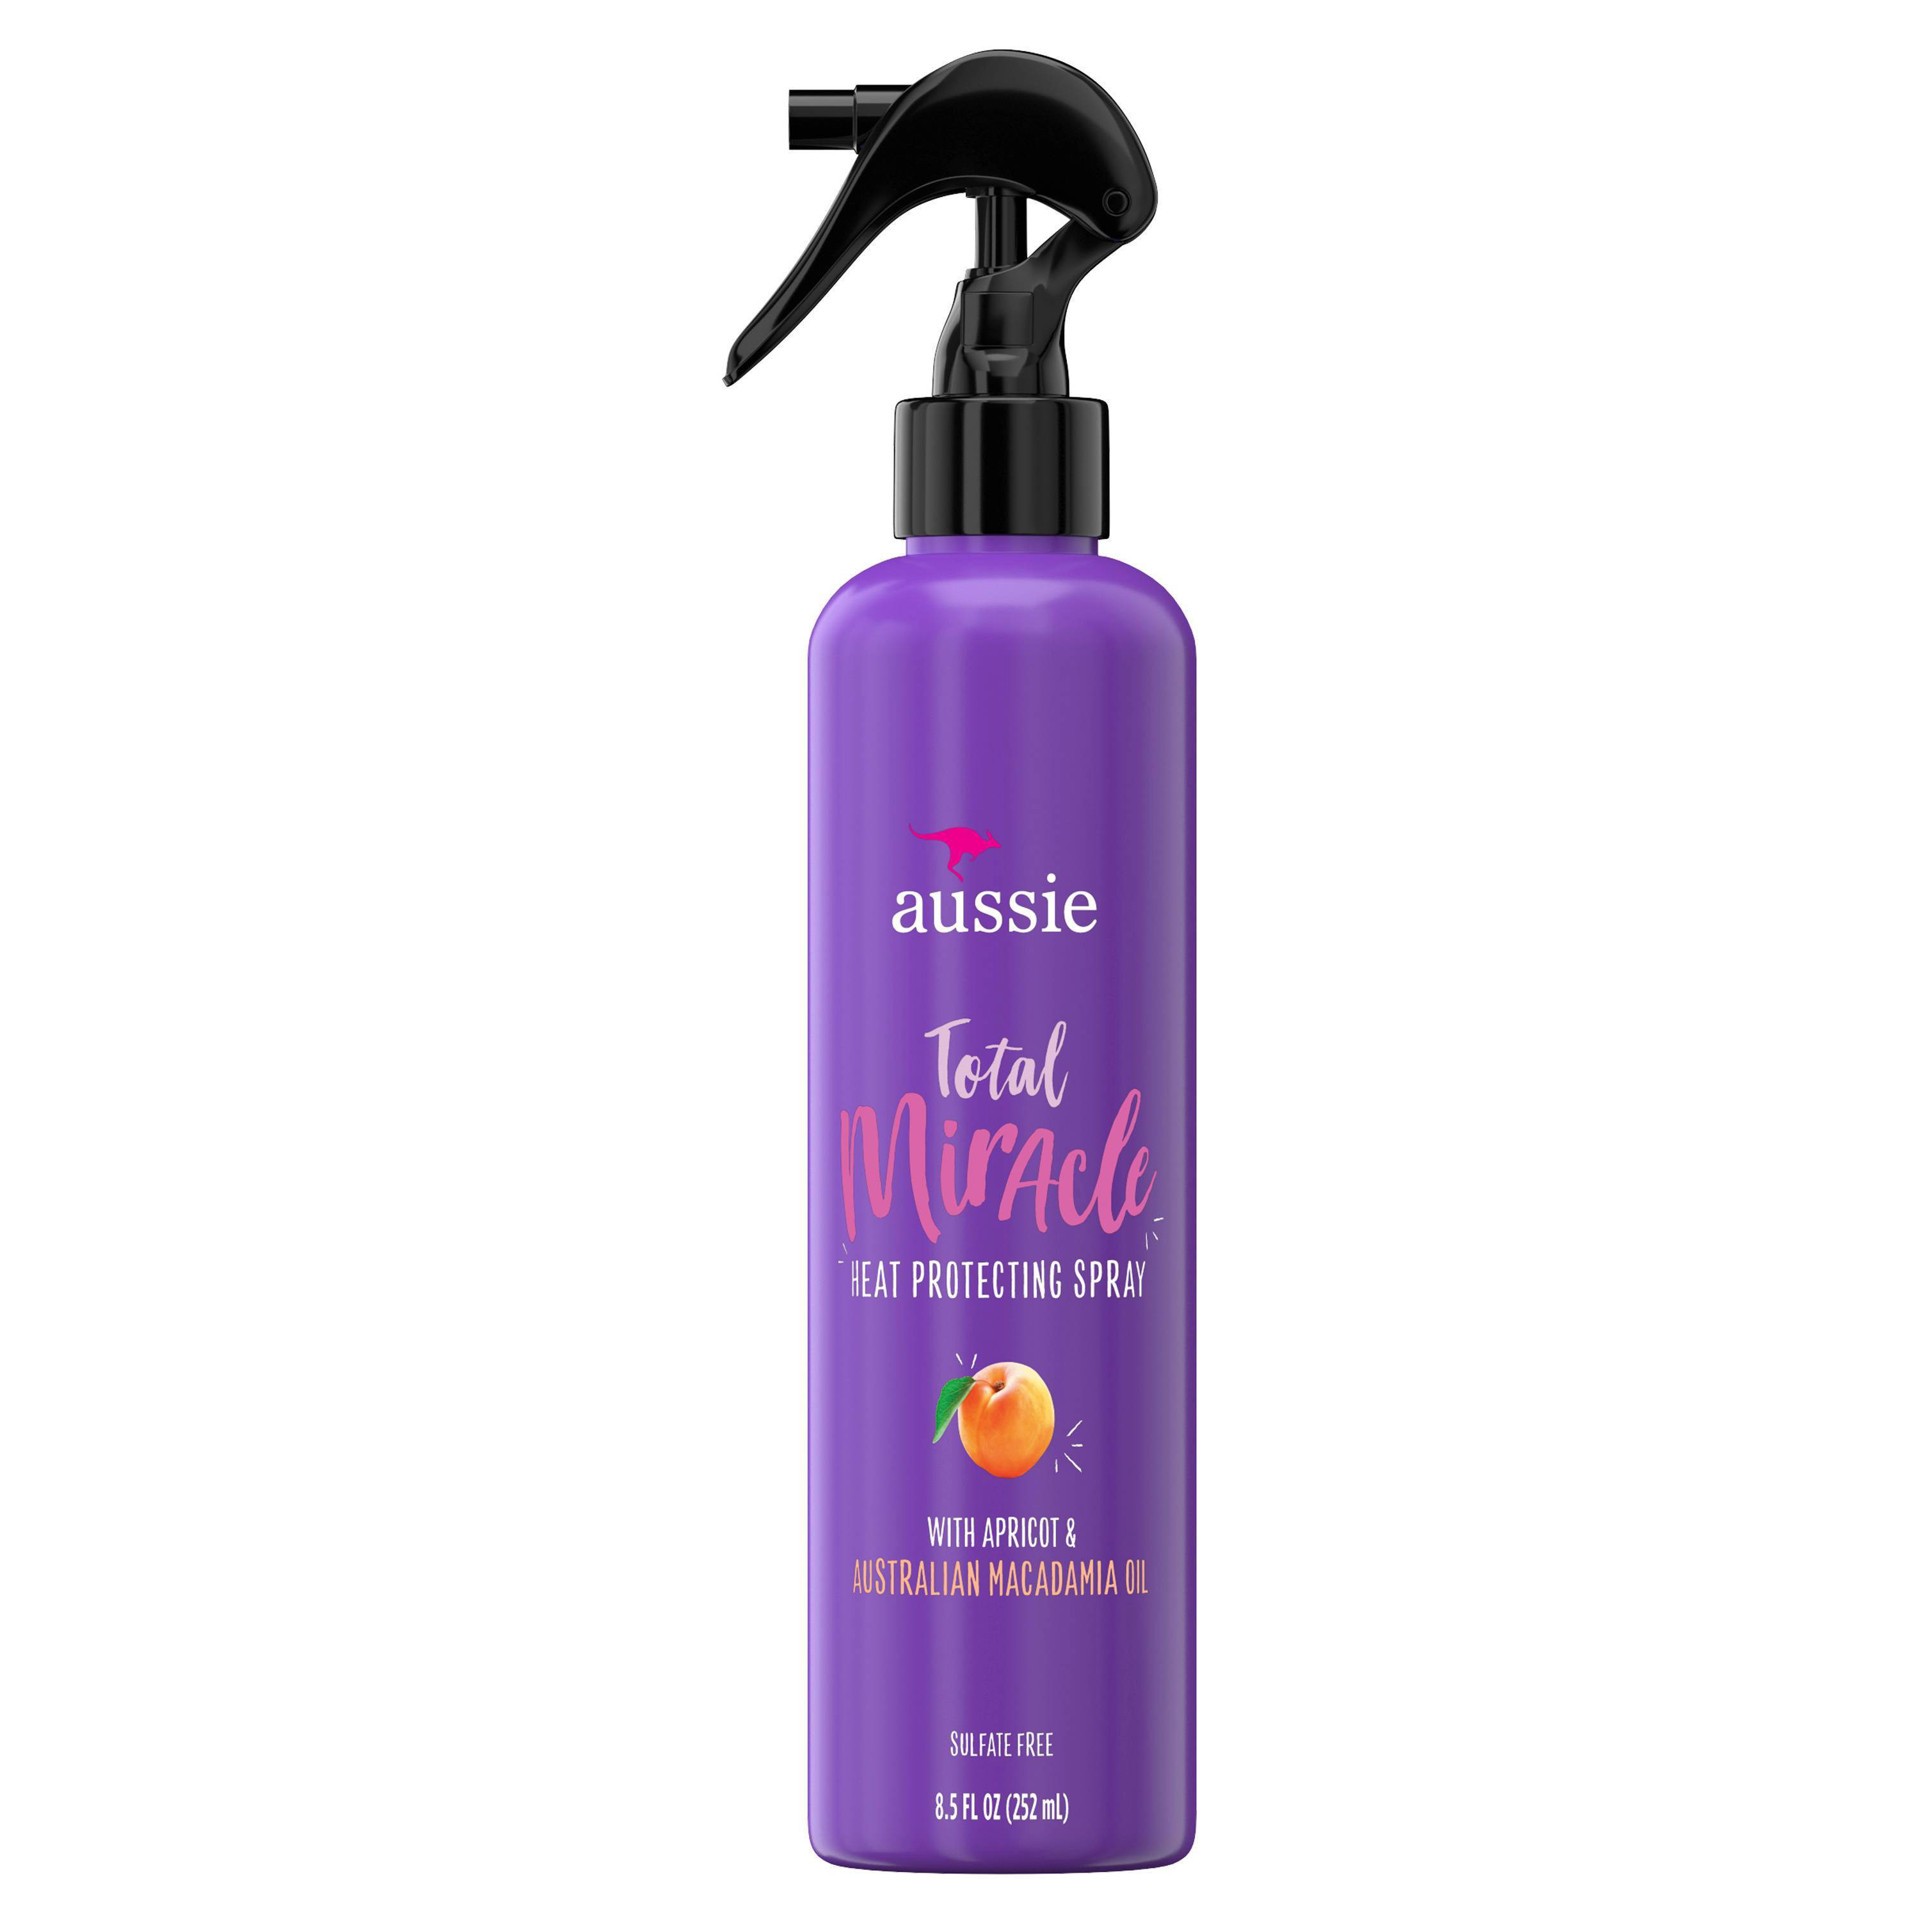 slide 1 of 2, Aussie Total Miracle Heat Protecting Spray with Apricot and Australian Macadamia Oil, 8.5 fl oz